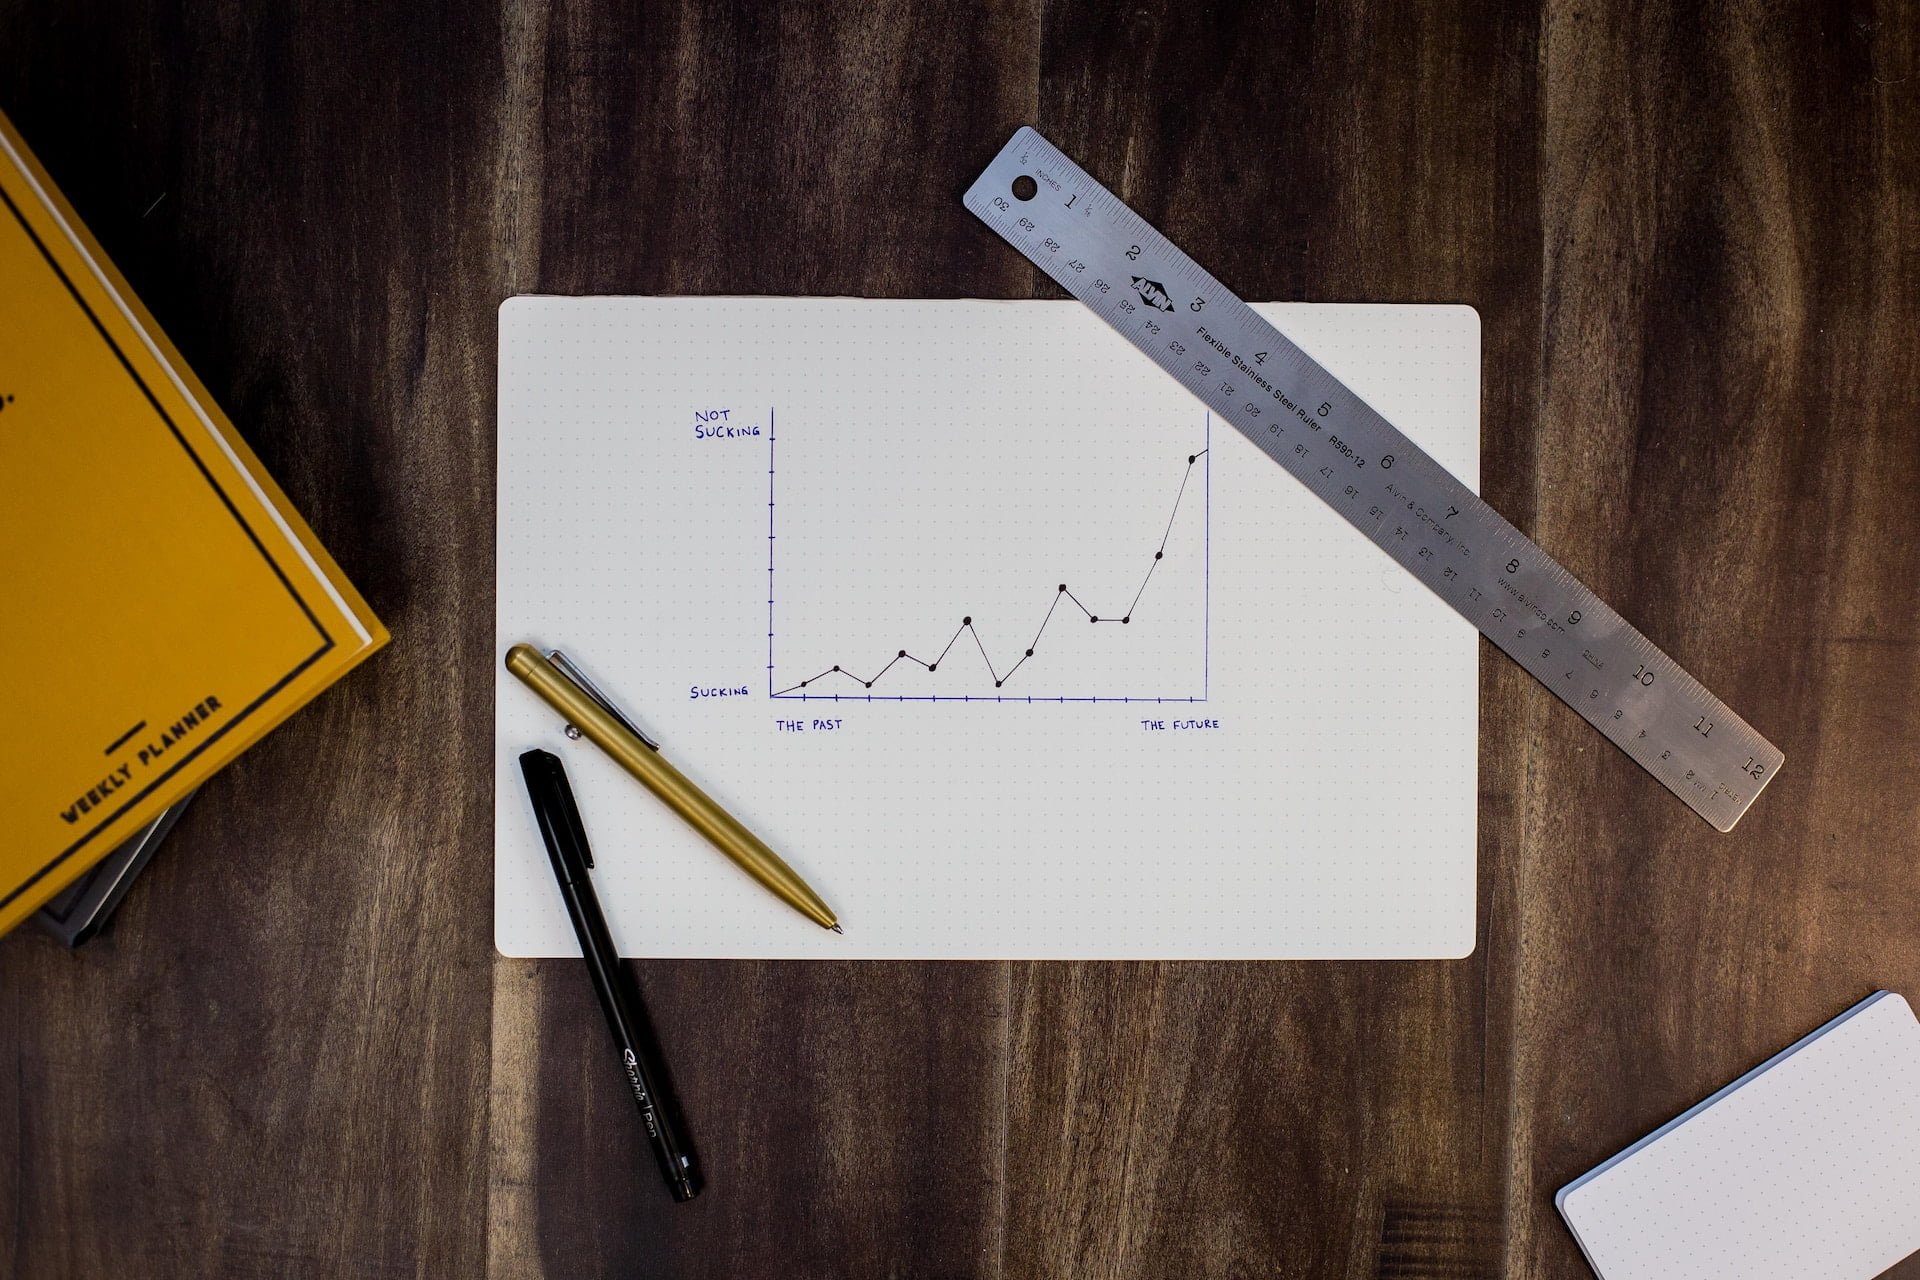 Depicts a generic graph on a table near pens and a ruler. Used as a cover image for an article modeling Arrived Homes returns.